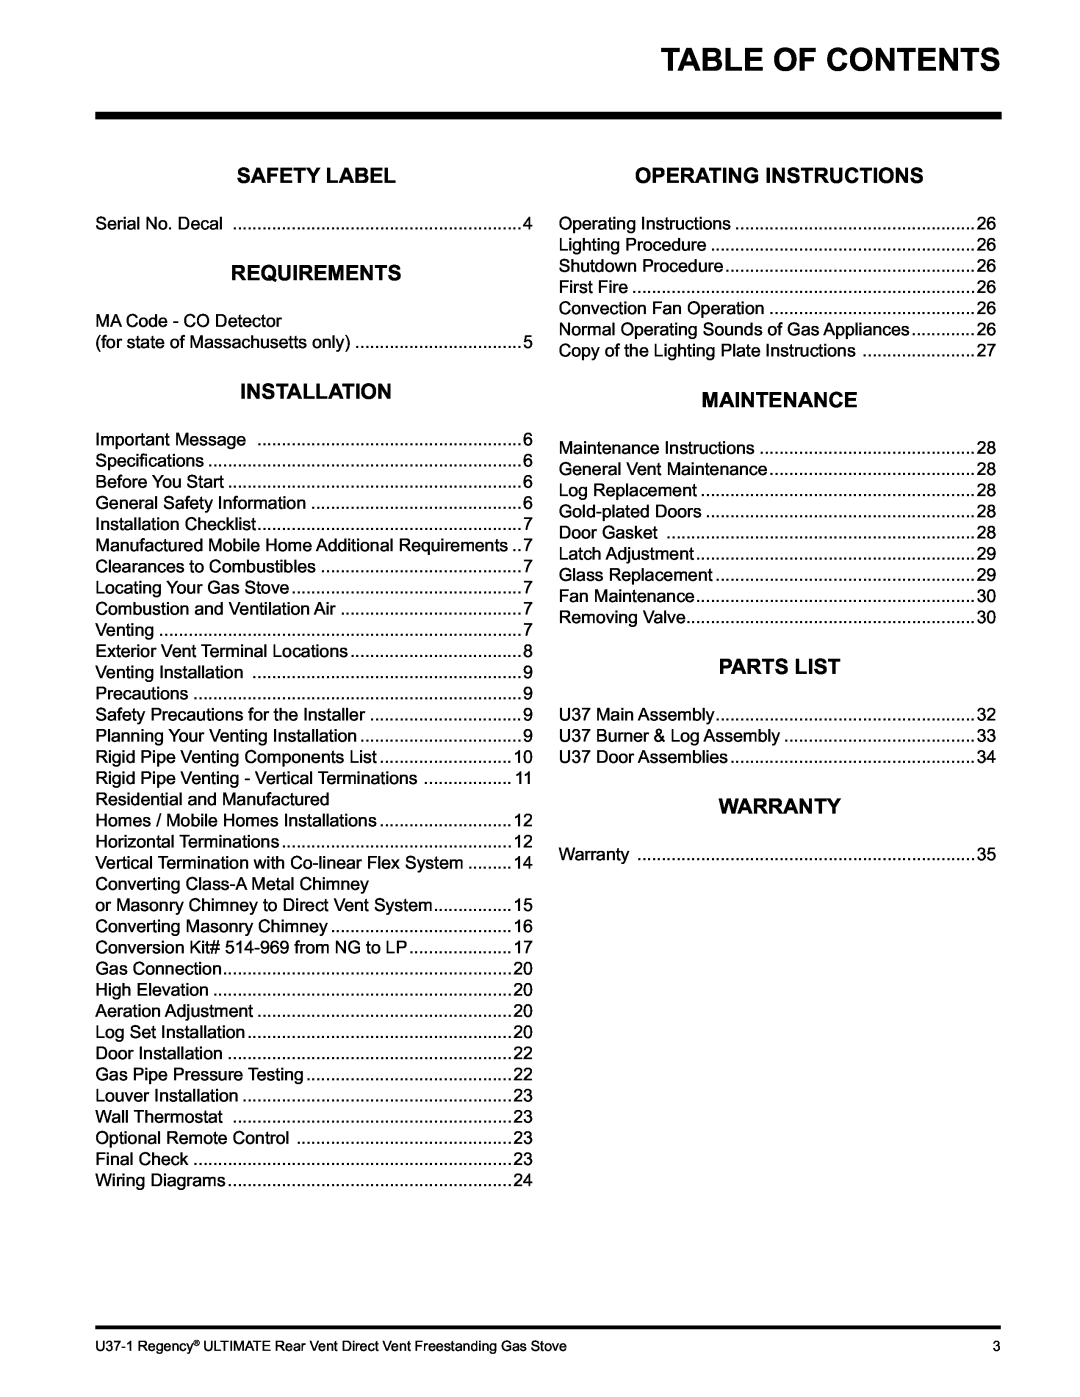 Regency U37-NG1 Table Of Contents, Operating Instructions, Installation, Parts List, Warranty, Safety Label, Requirements 